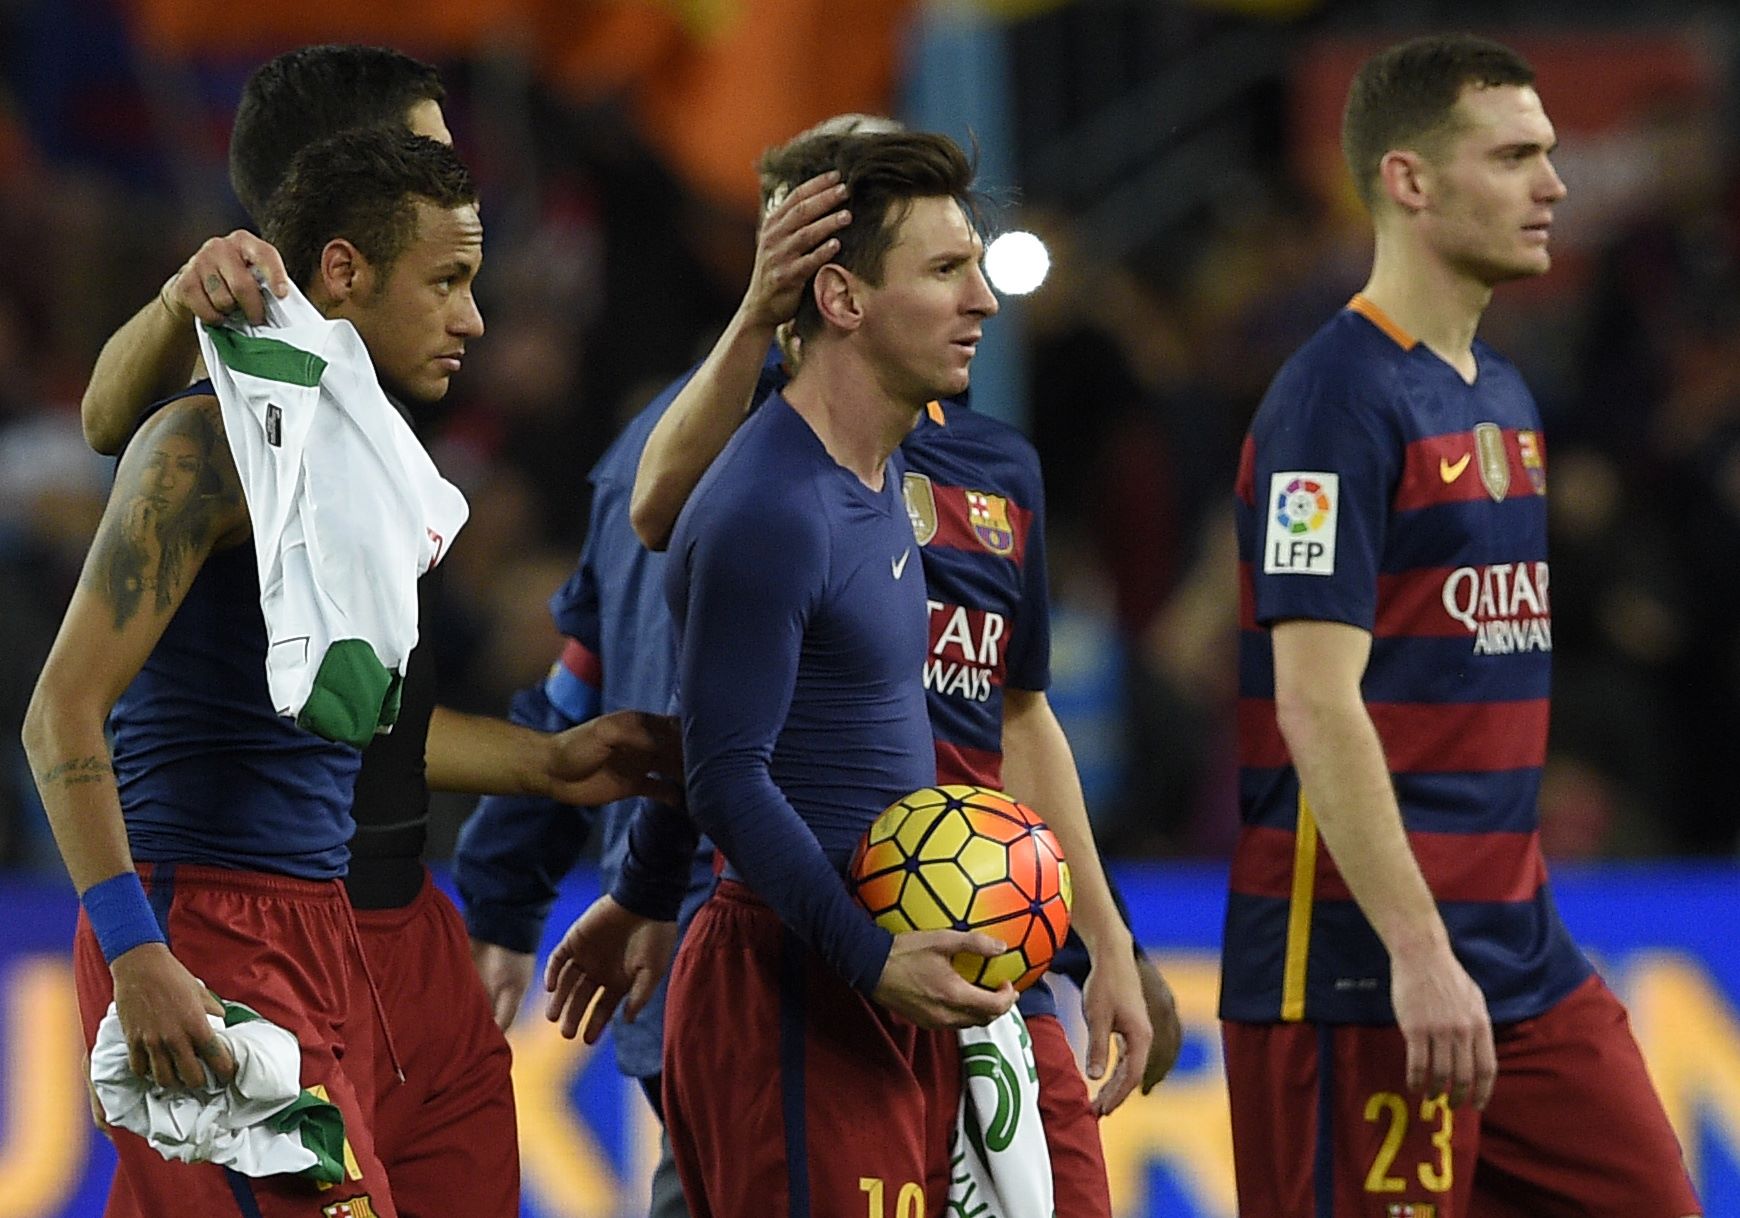 Barcelona's Argentinian forward Lionel Messi is congratuled by teammates after his hat-trick next to Barcelona's Brazilian forward Neymar (L) and Barcelona's Belgian defender Thomas Vermaelen (R) at the end of the Spanish league football match FC Barcelona vs Granada CF at the Camp Nou stadium in Barcelona on January 9, 2016. AFP PHOTO / LLUIS GENE